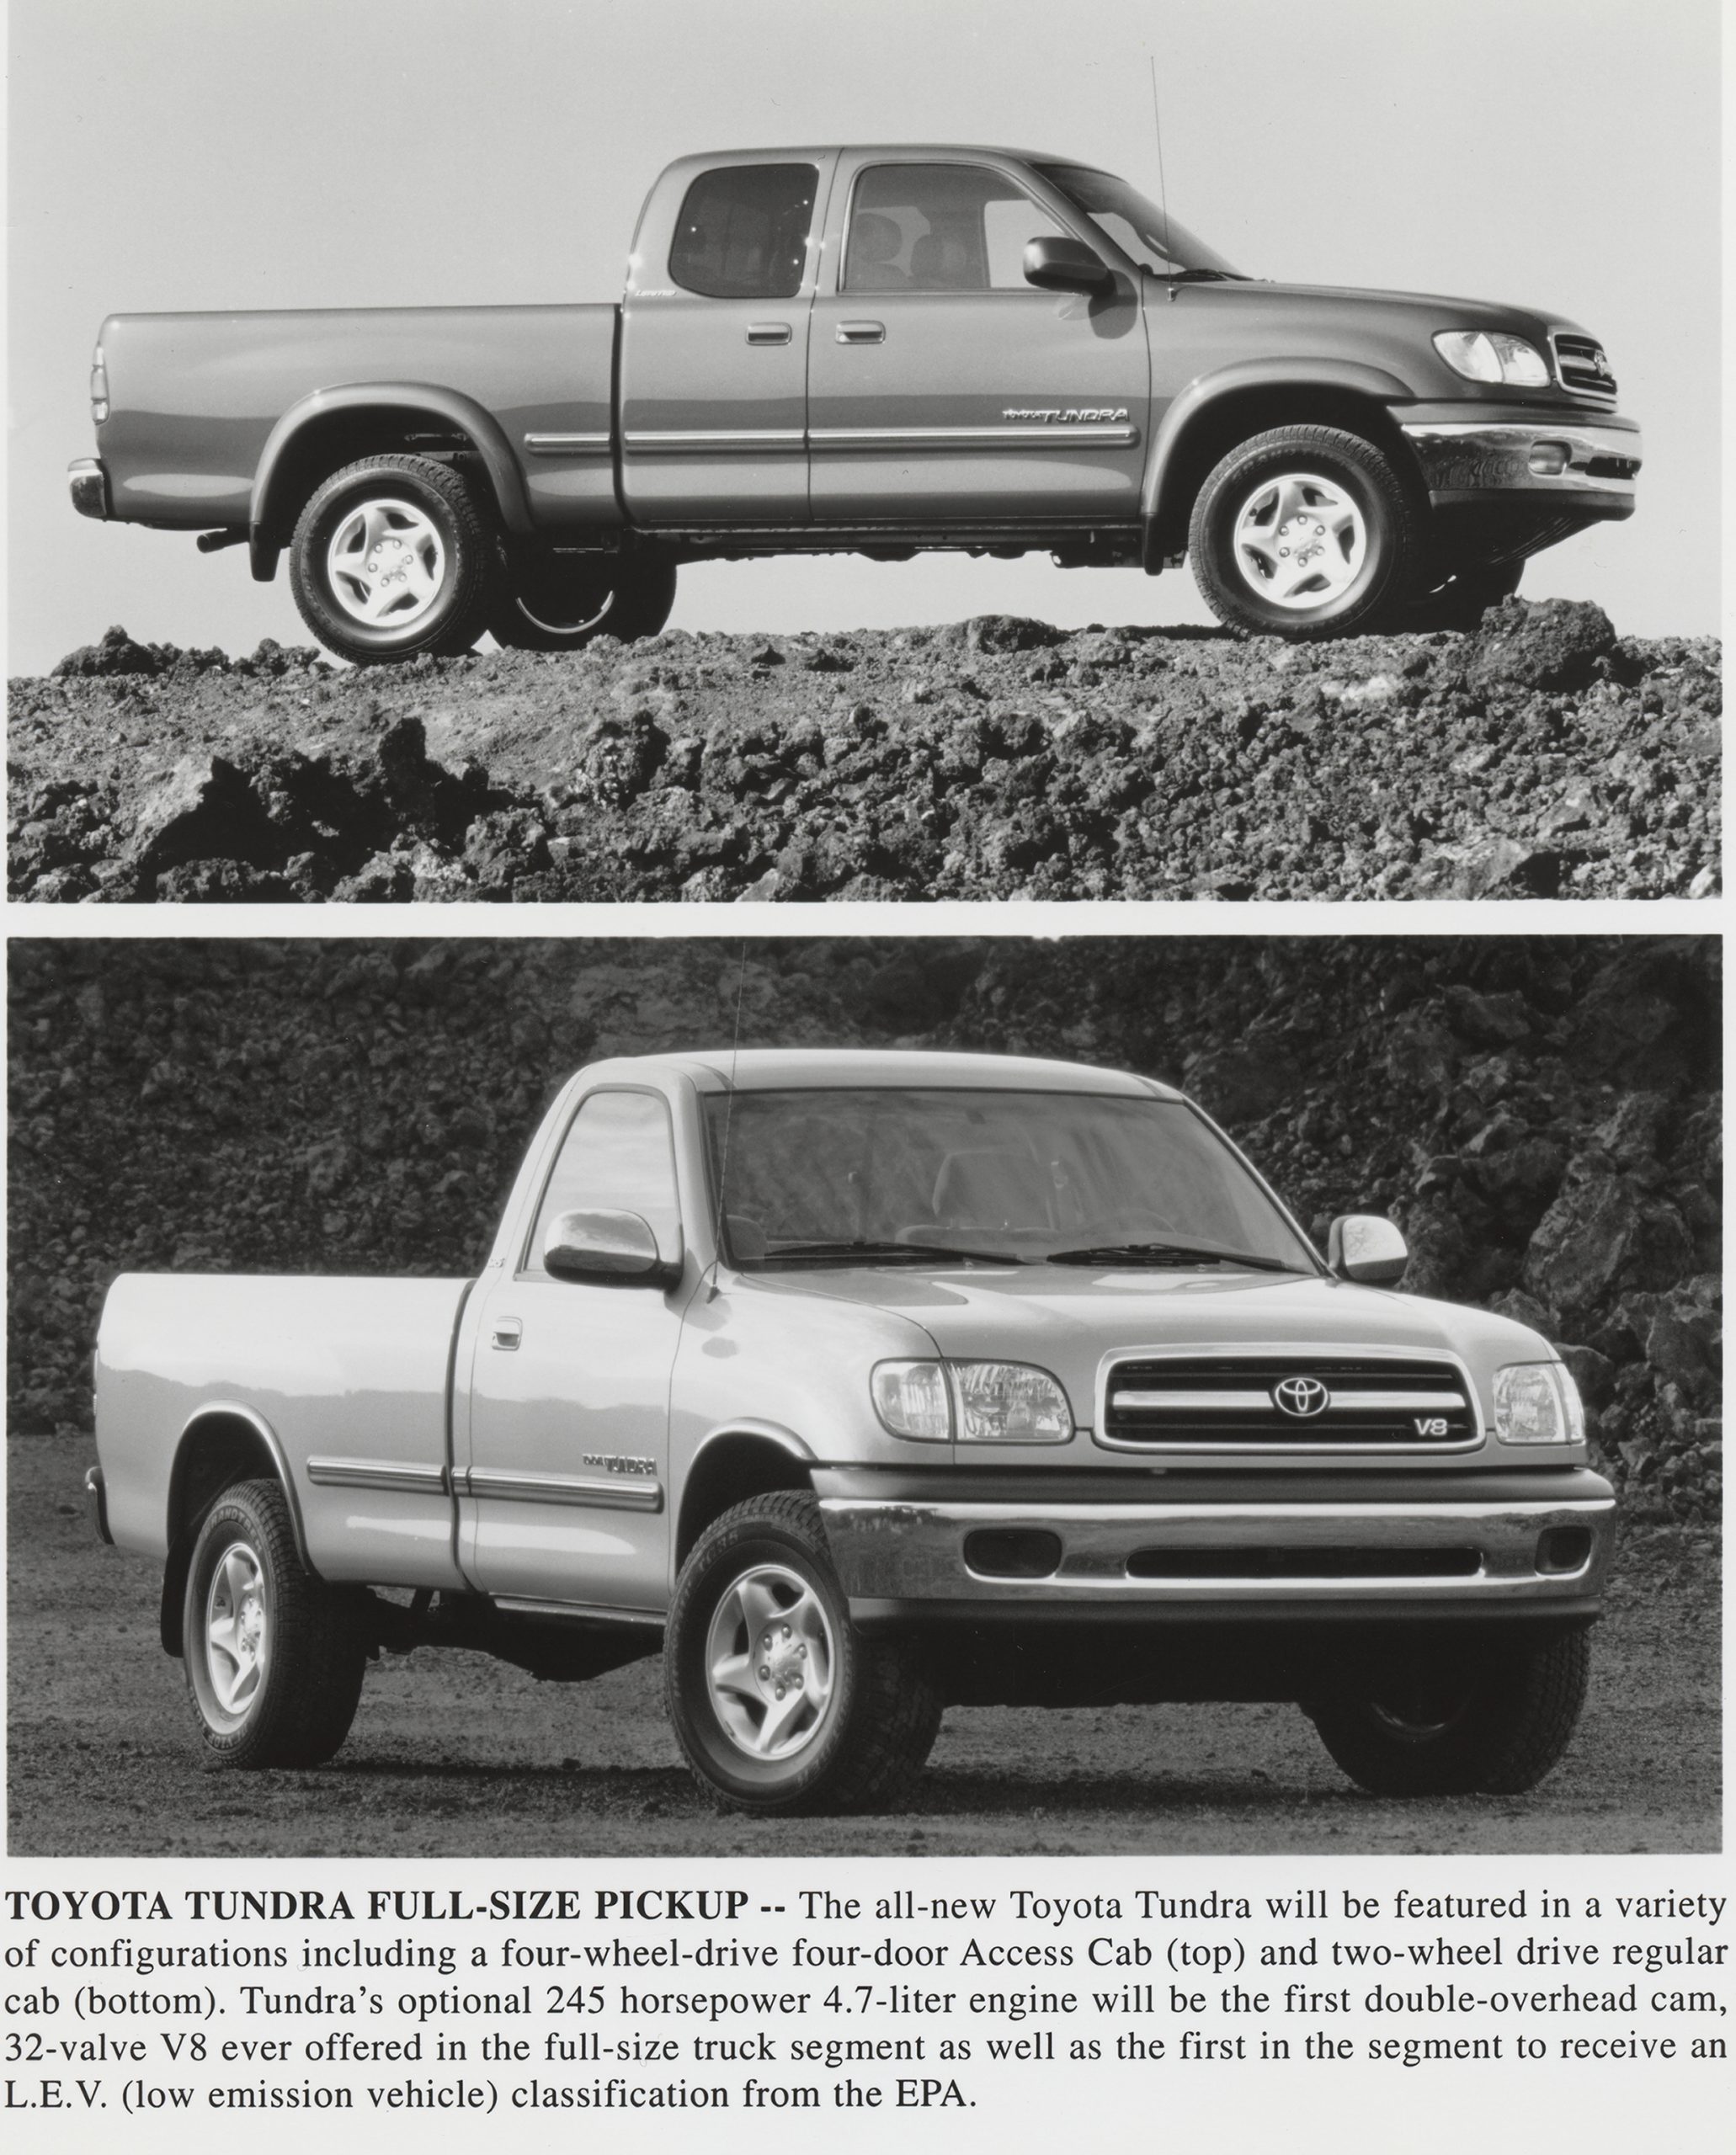 A news clipping talking about the first generation Toyota Tundra answering the question "When did the Toyota Tundra come out